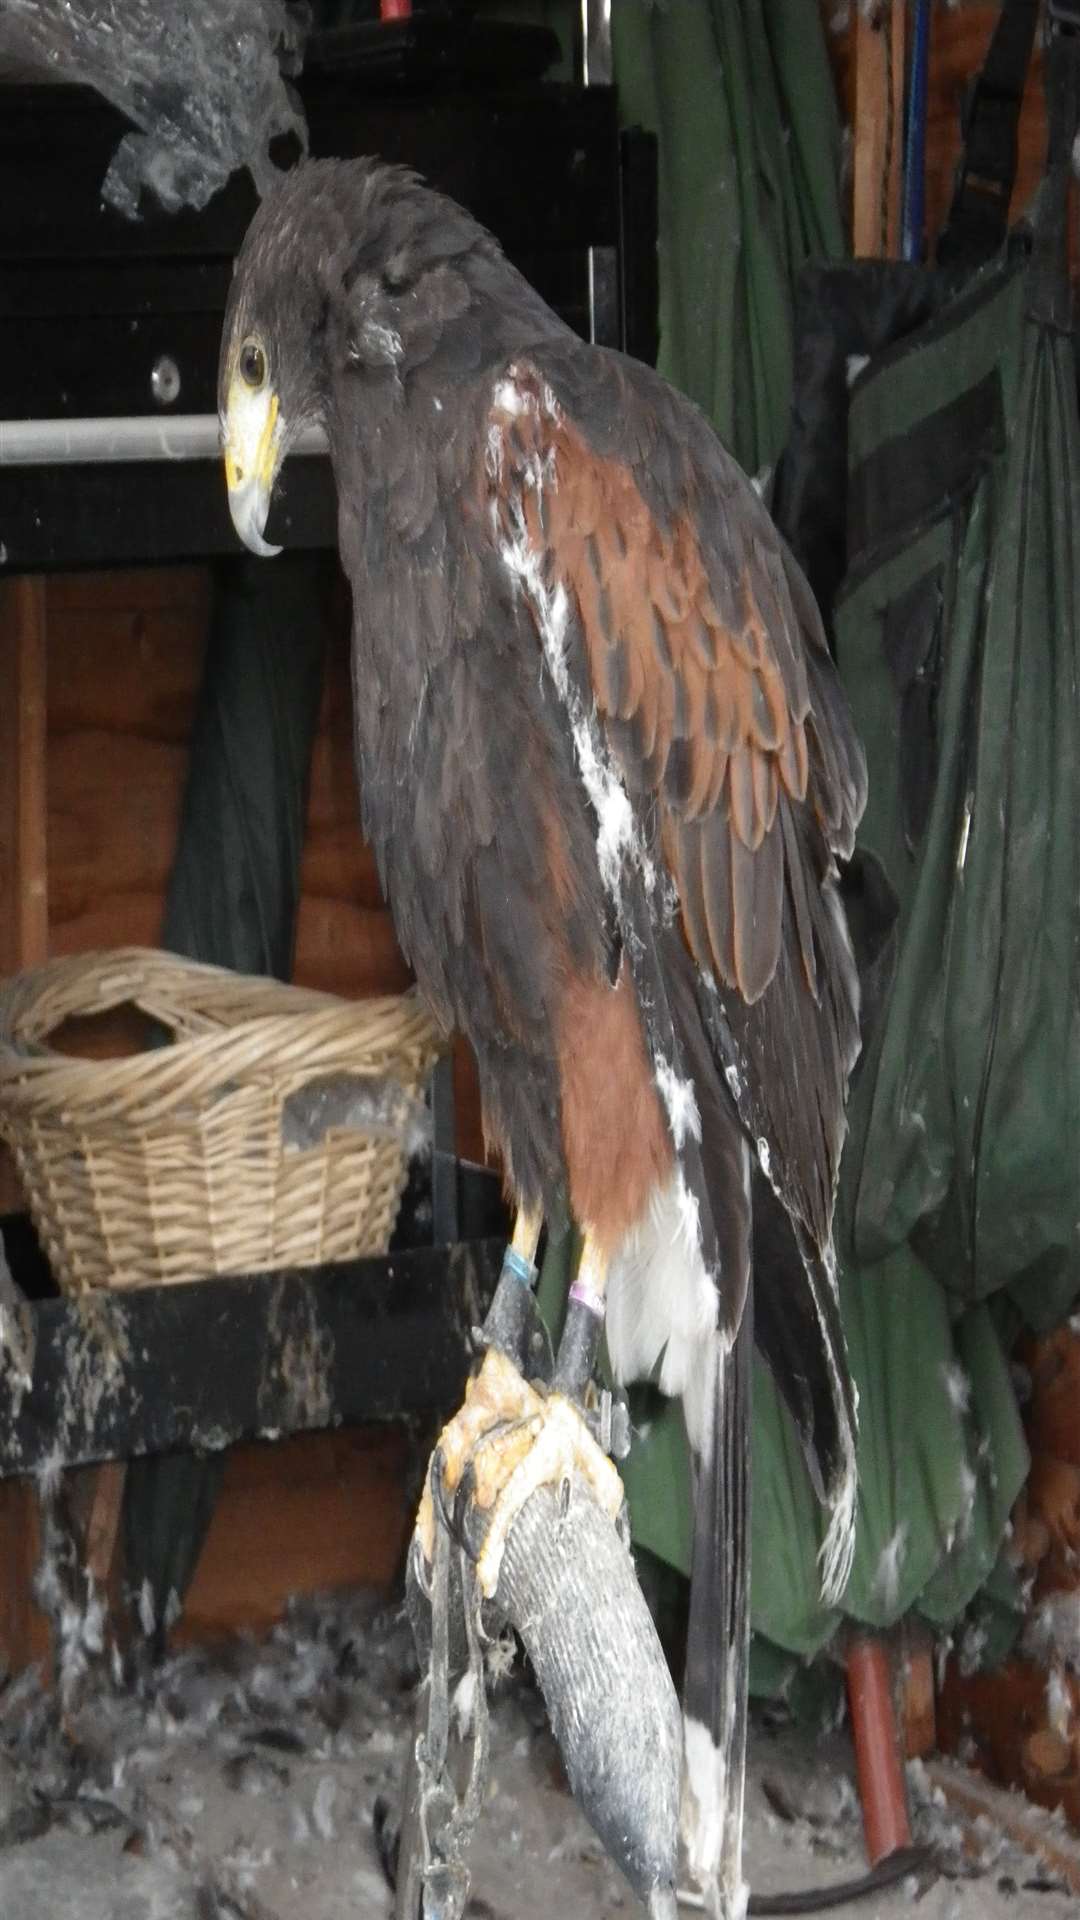 A bird of prey which was among 93 animals who were found to have suffered unnecessarily in Holm Hill, Harrietsham